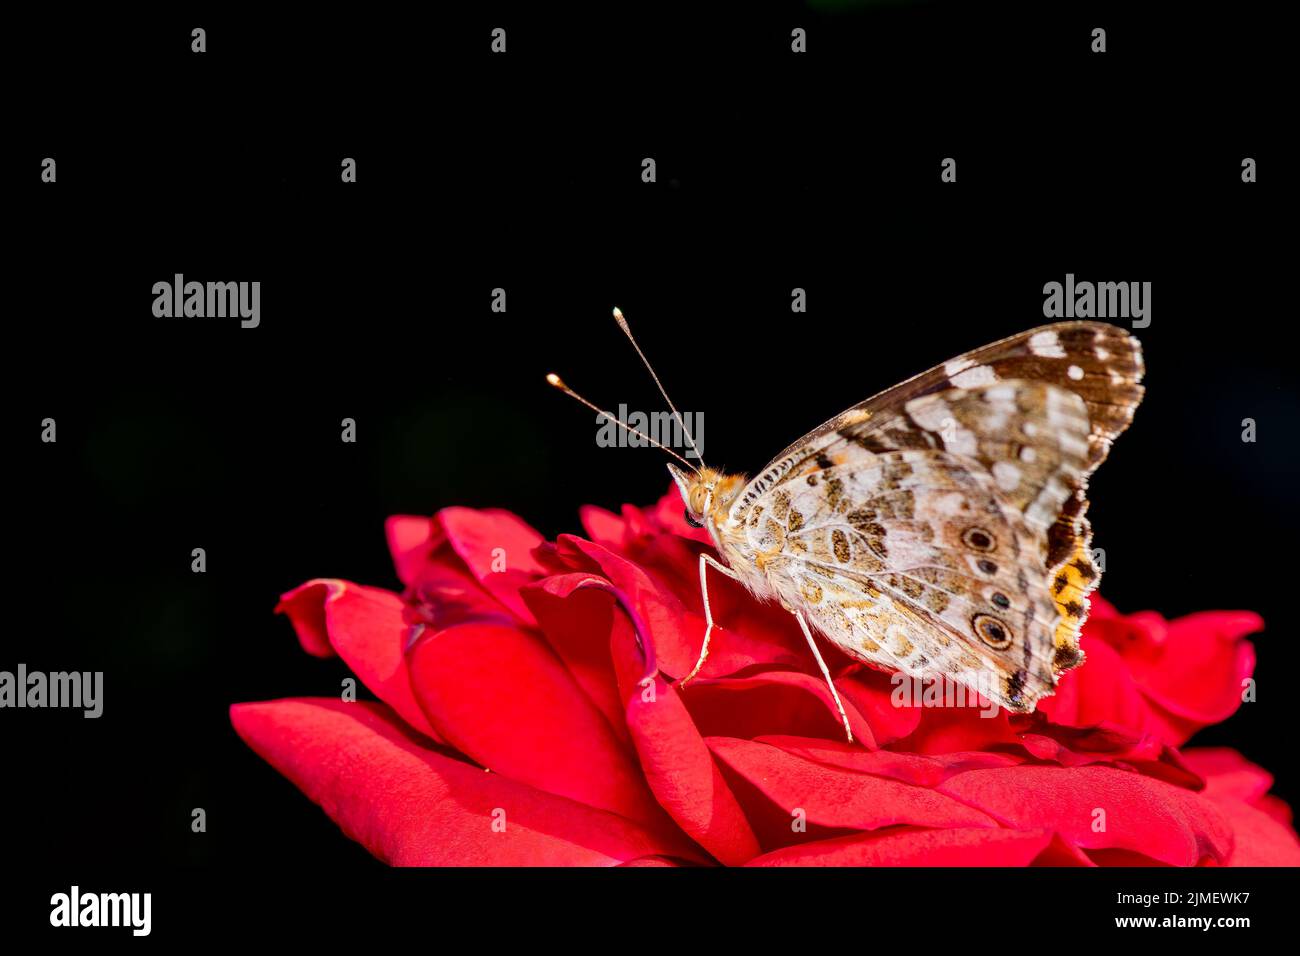 Close up look of a butterfly on a red rose against a black background. Macro photo. Stock Photo